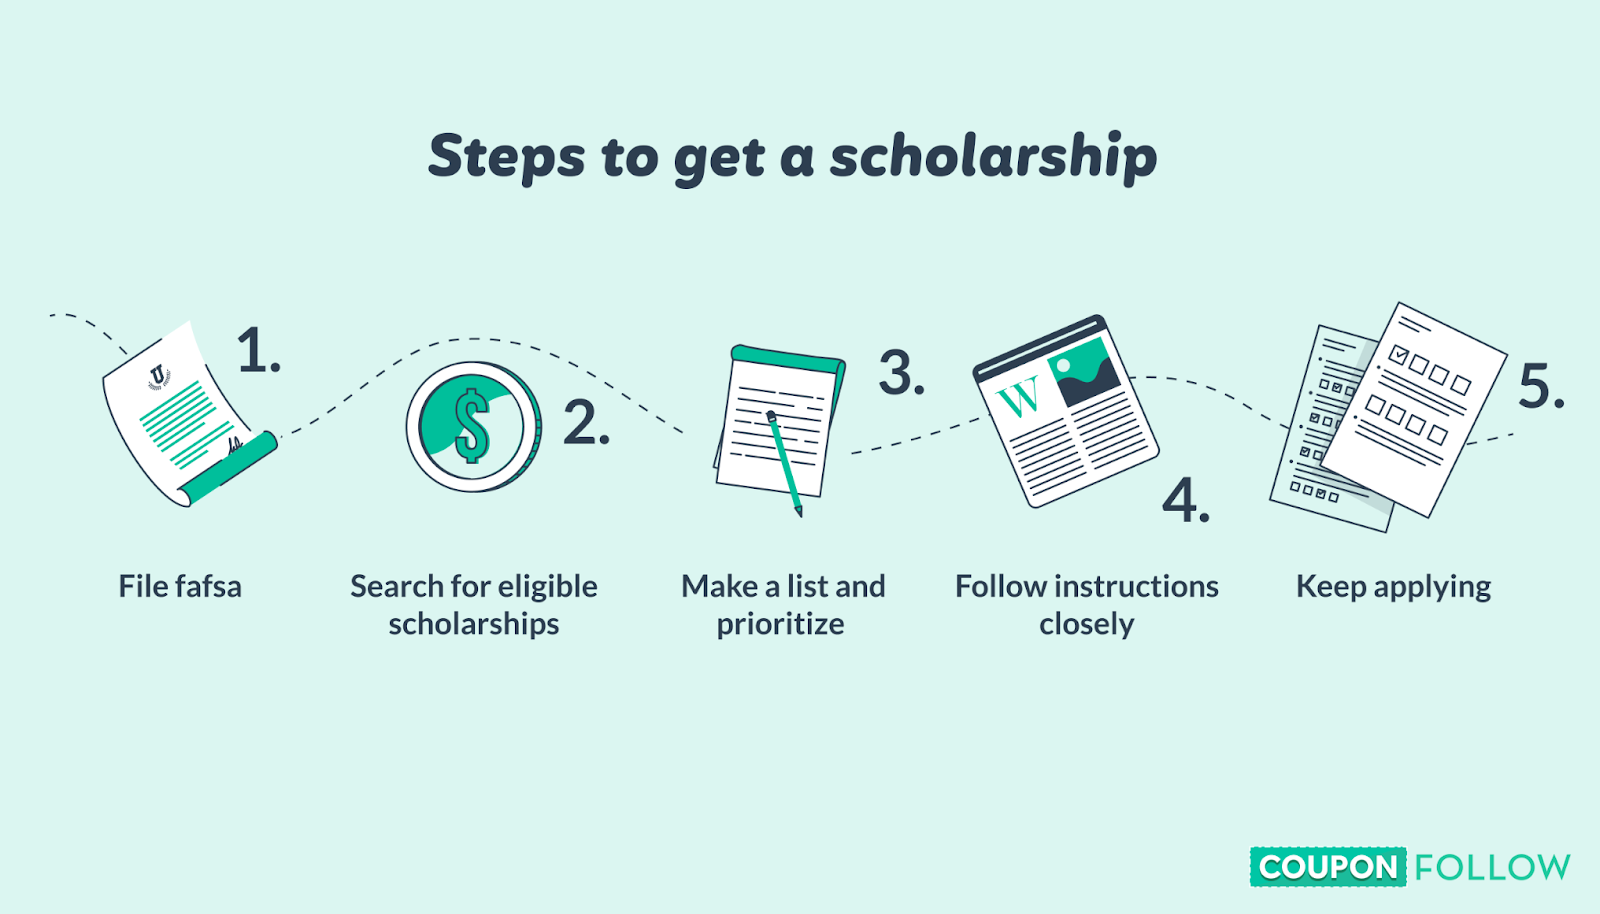 Steps to get a scholarship